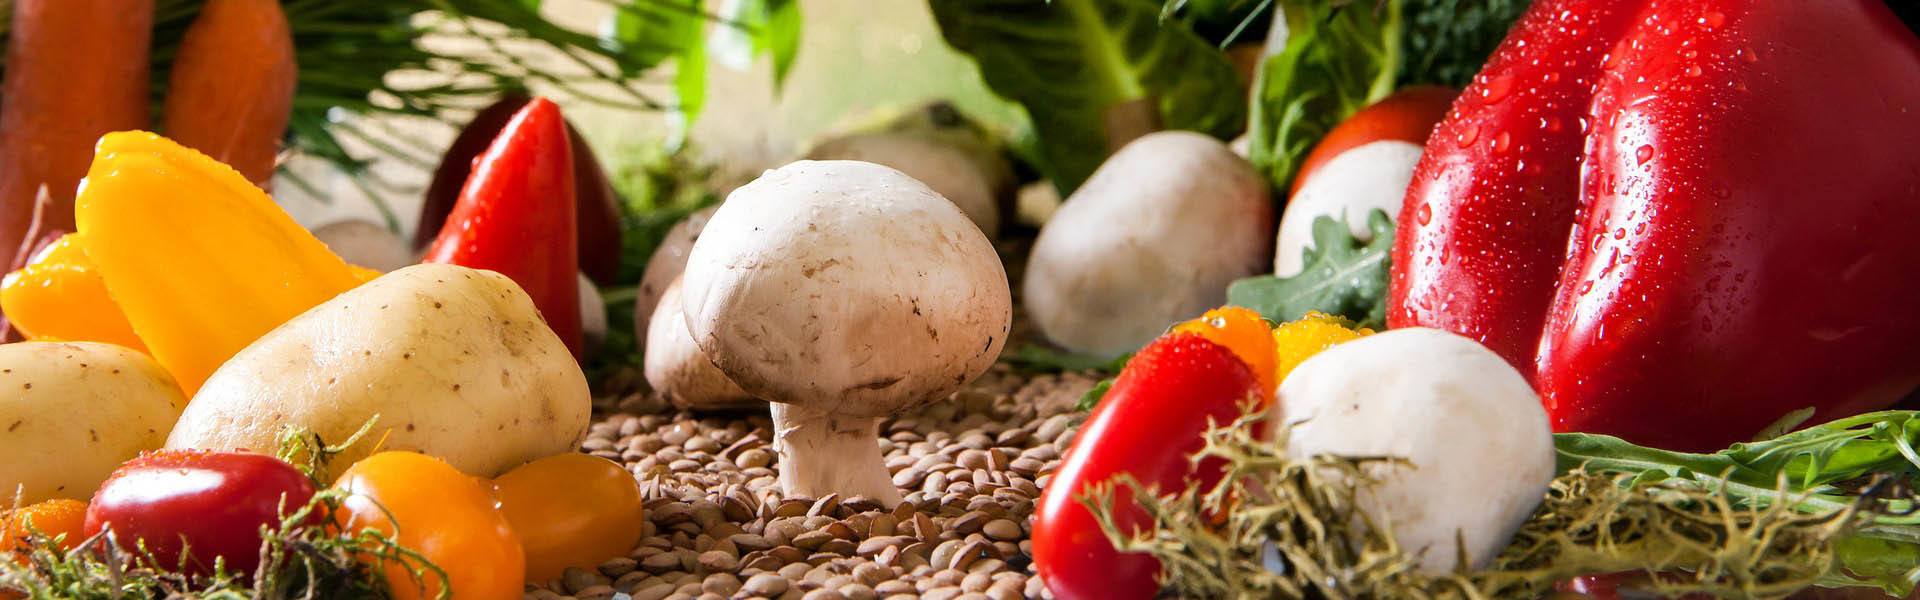 Health and Nutritional Benefits Of Mushrooms | GroCycle